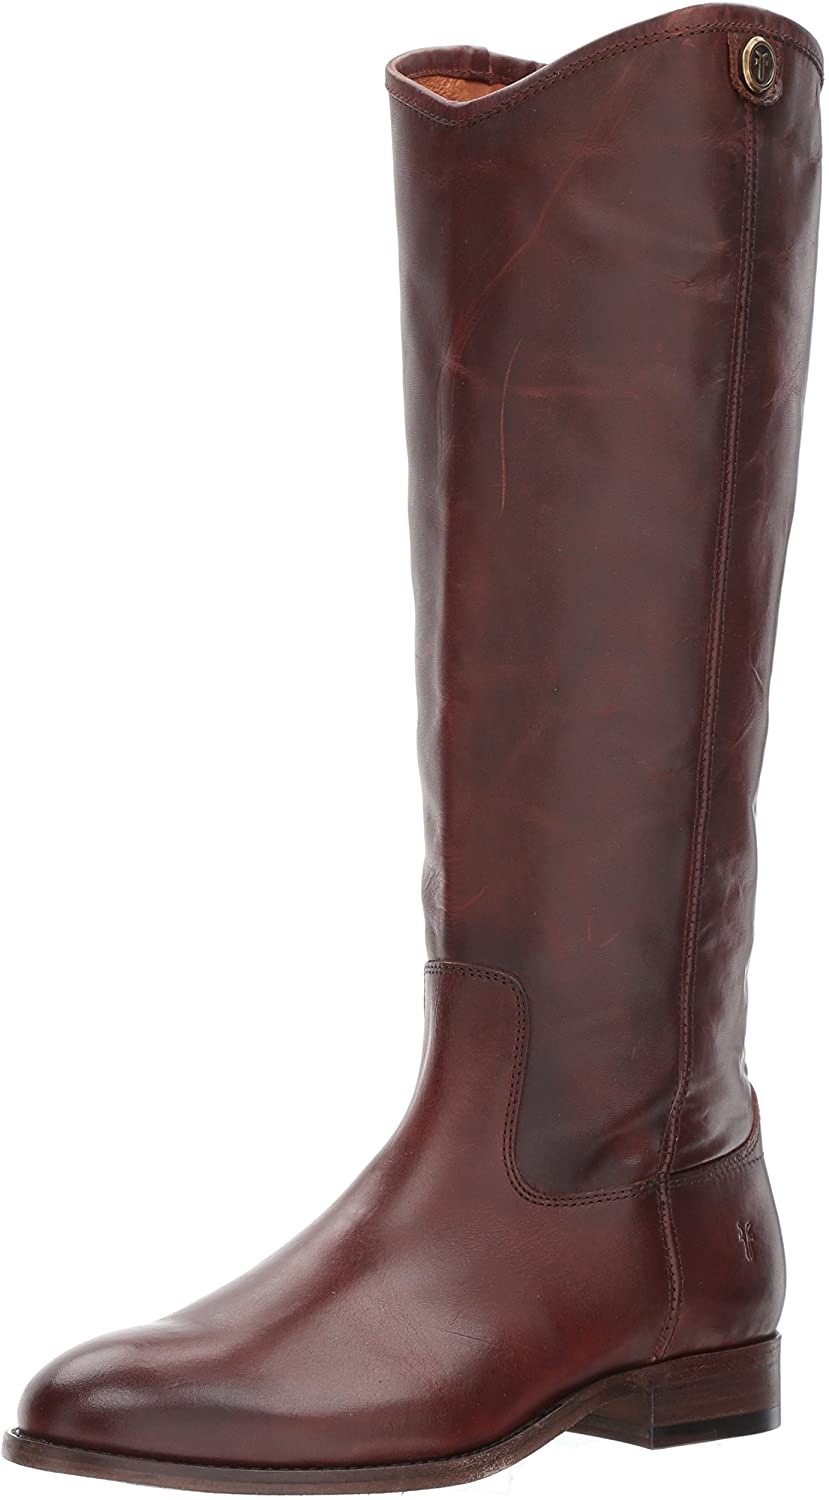 Women's Melissa Button 2 Riding Boot Redwood from front view